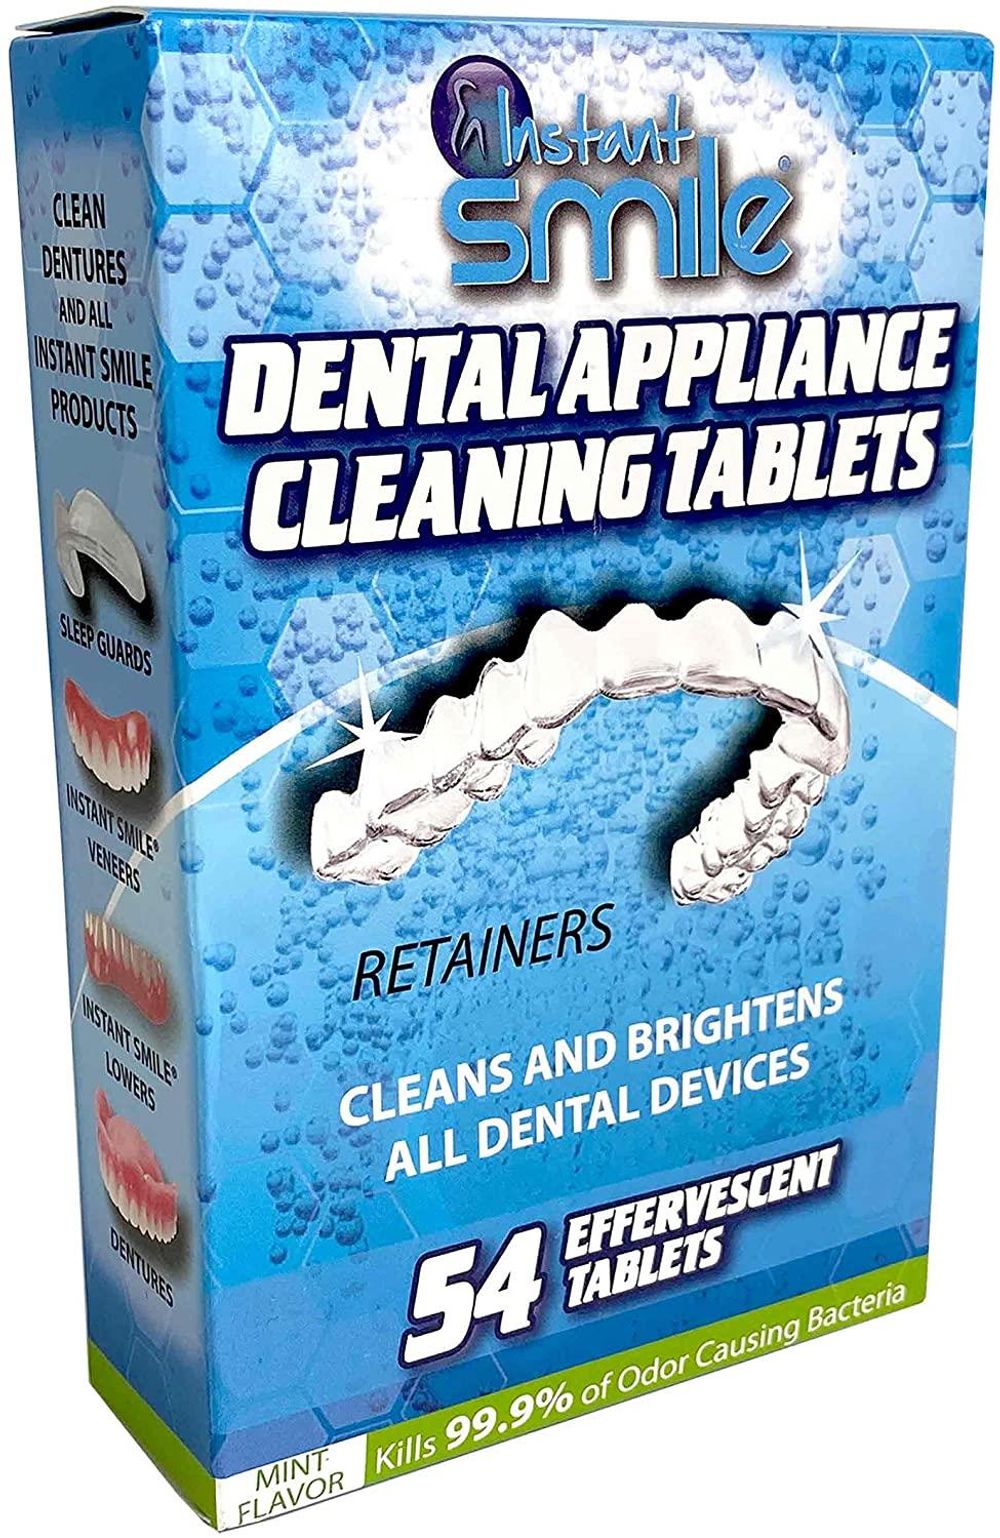 Instant Smile Dental Appliance Cleaning Tablets with 54 Tablets